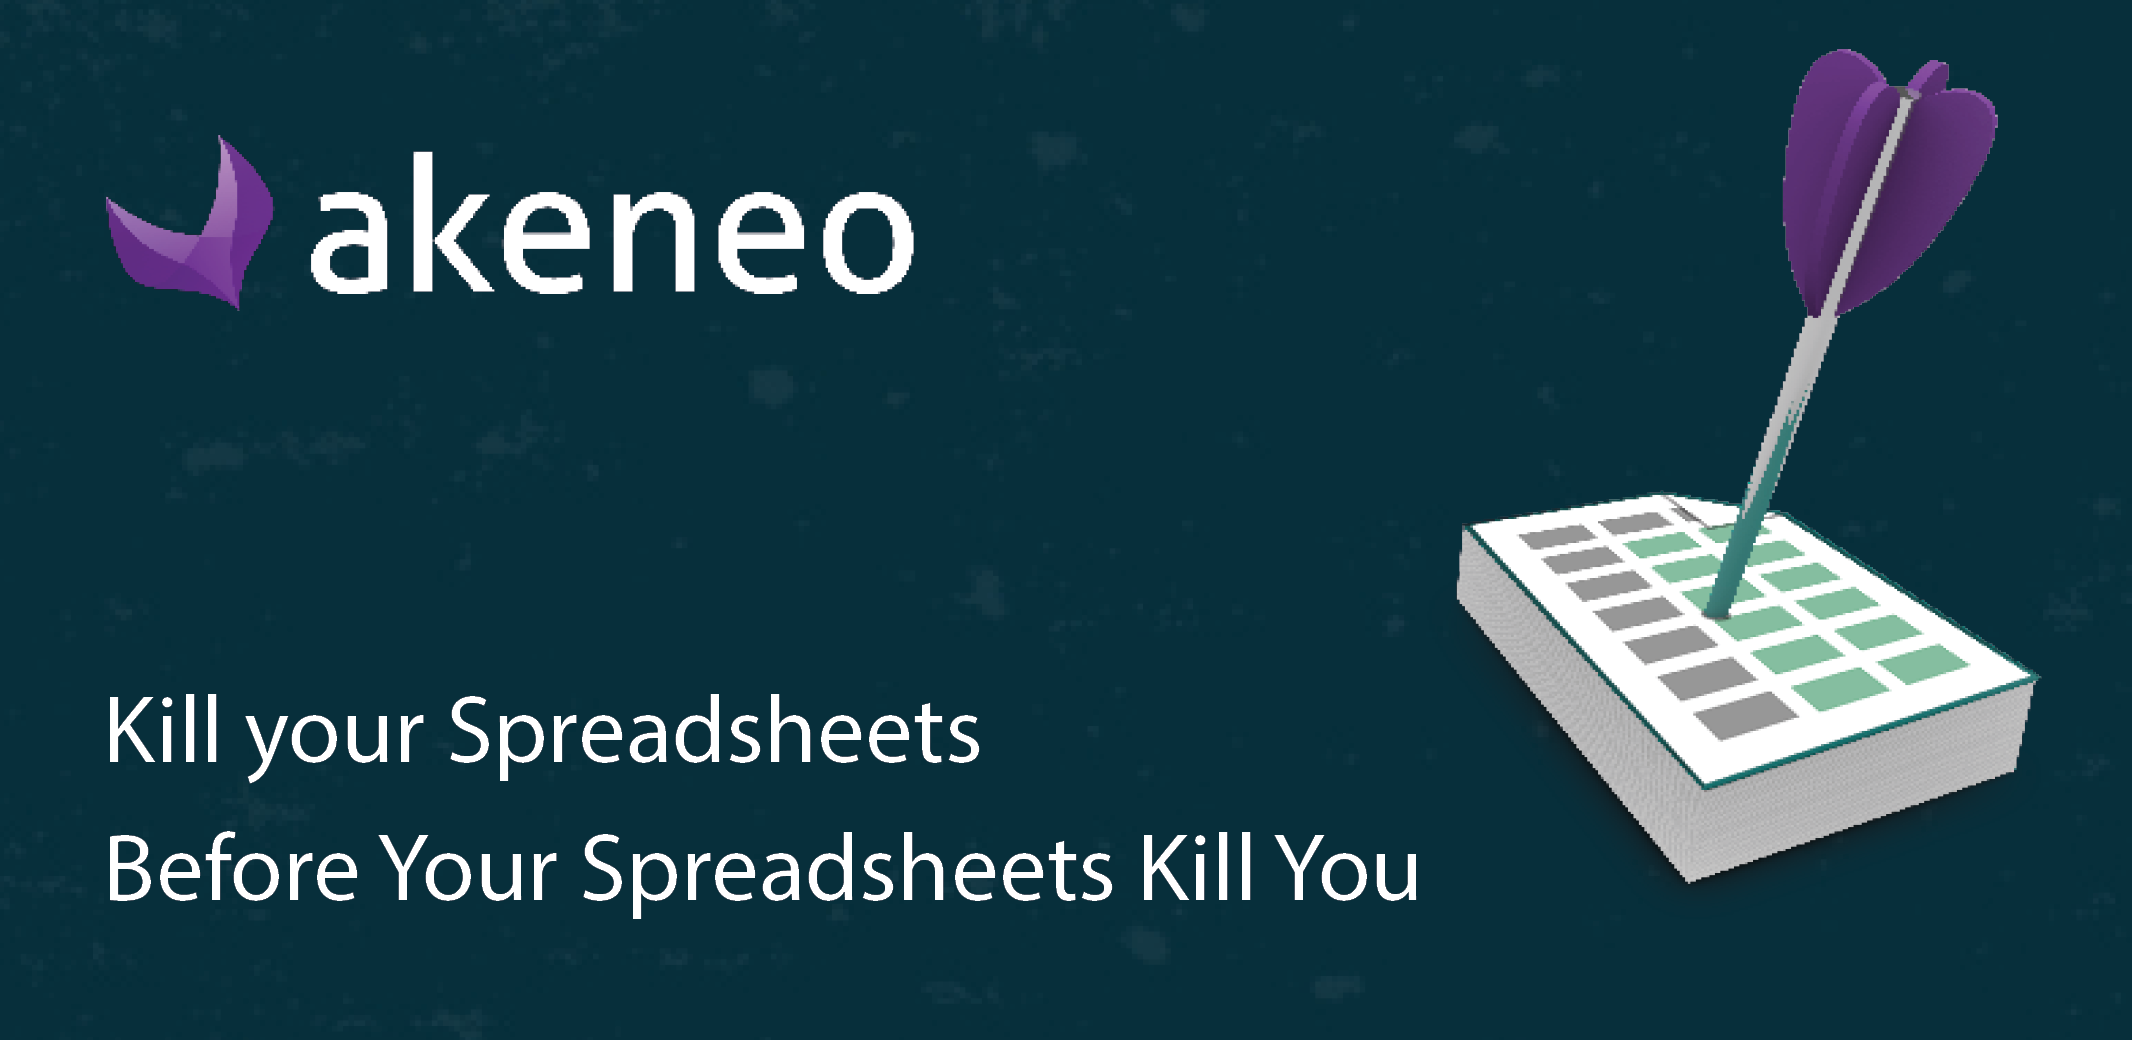 Kill your spreadsheets before your spreadsheets will kill you